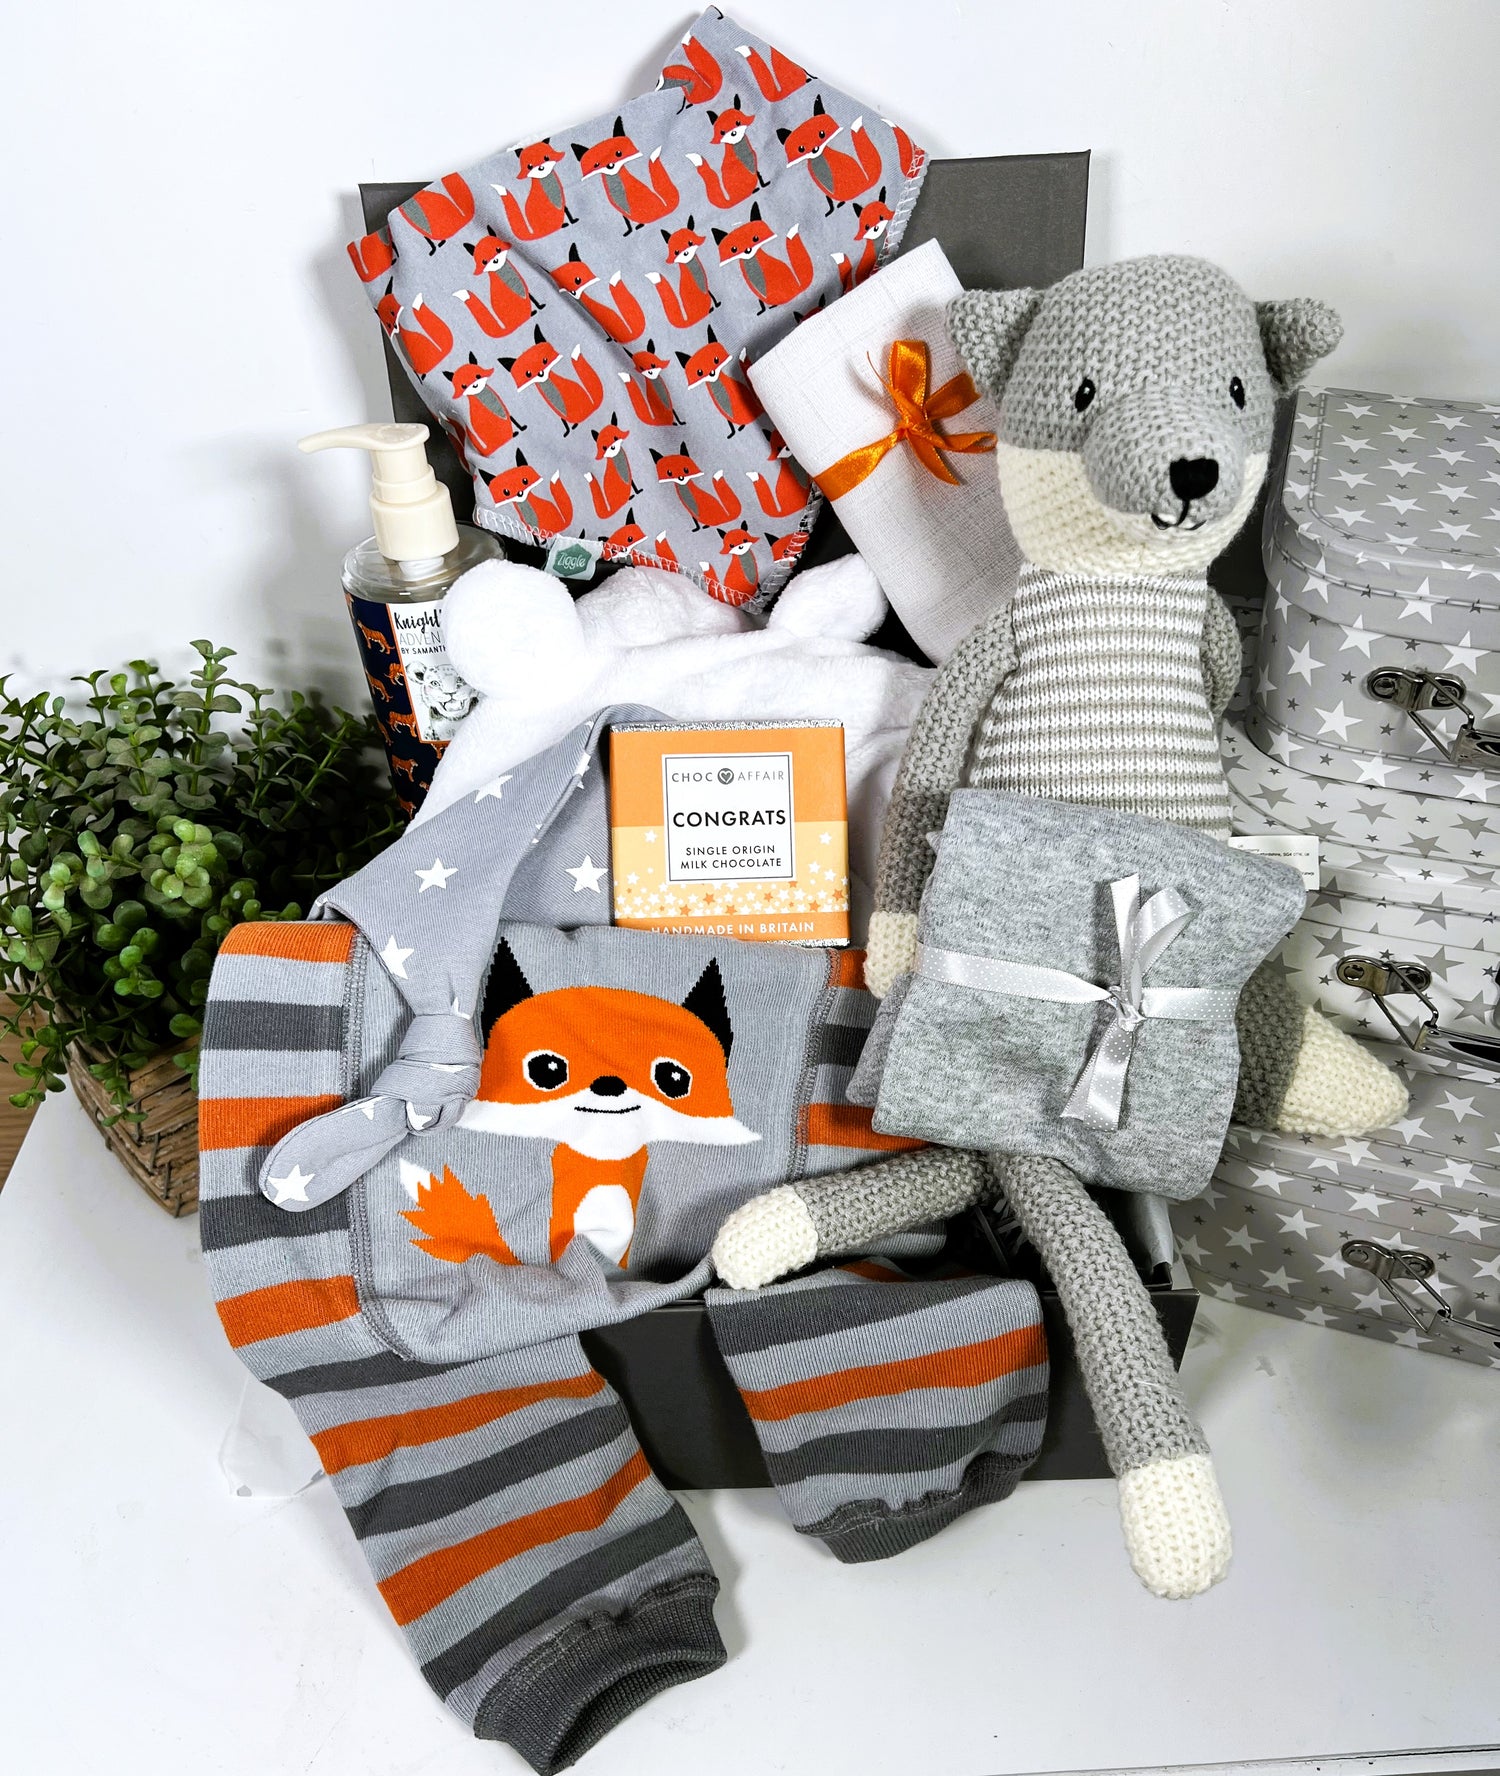  A fox themed new baby hamper containing a wilbeery fox knitted toy, a pair of Ziggle fox baby leggings with a Ziggle fox bib, a white hooded baby dressing gown, a bottle of baby wash, a Ziggle grey and white stars baby knot hat, a muslin square a grey baby vest and a bar of chocolate.